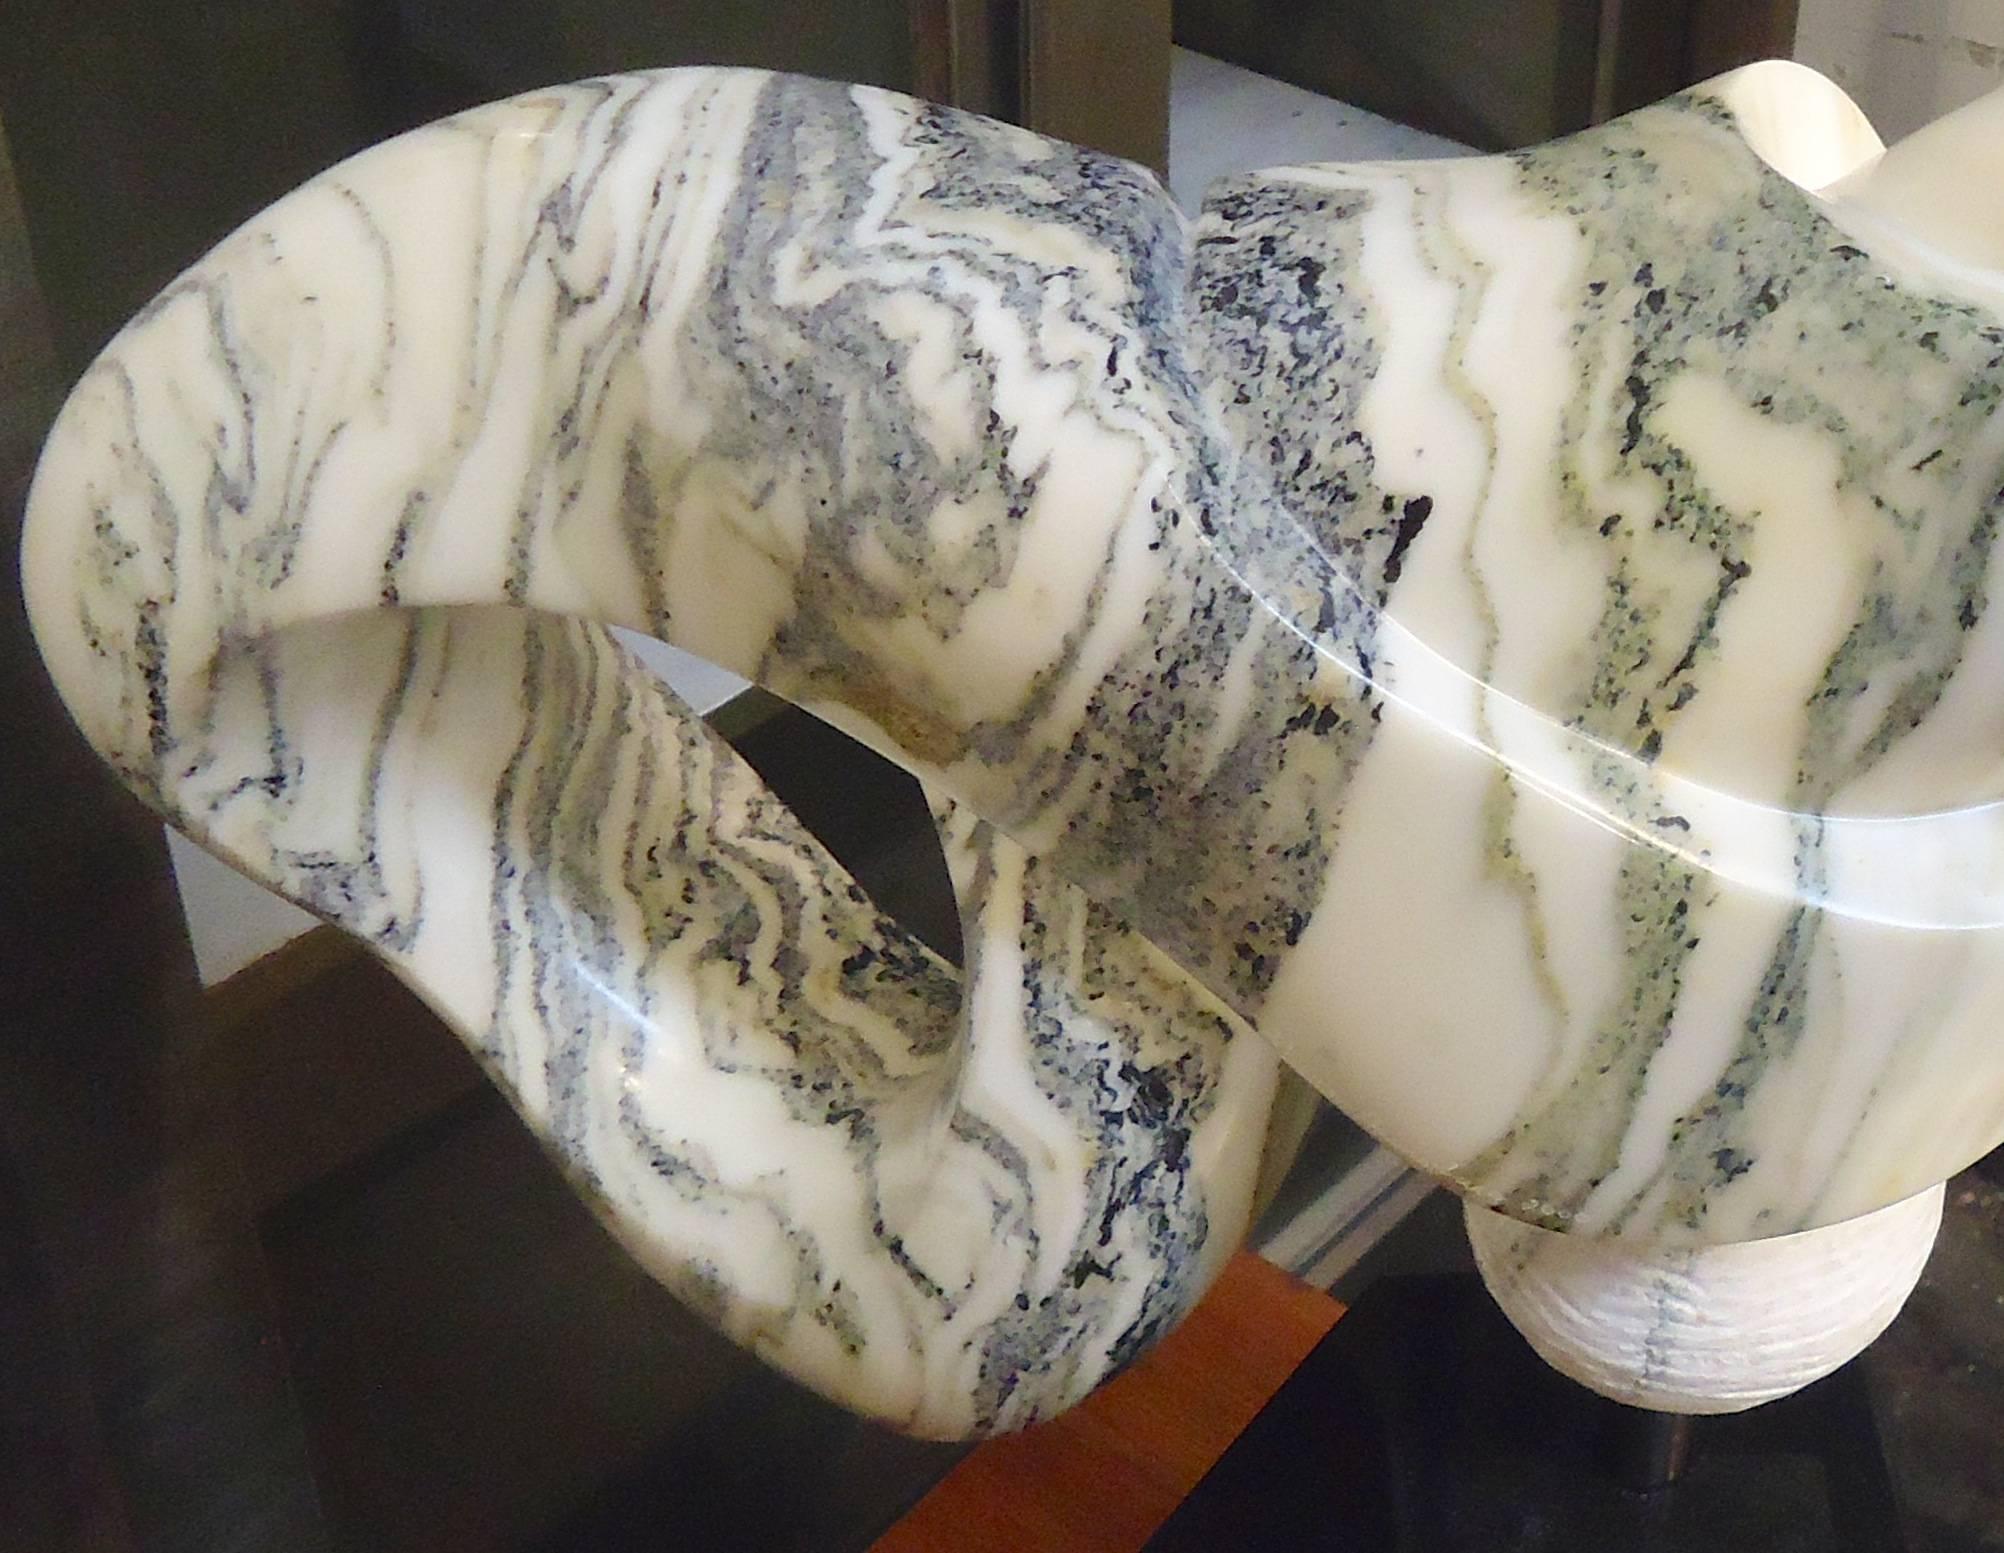 Beautiful sculpted marble artwork in the shape of a bow or infinity symbol. Signed by the American artist Sharon Gainsburg. This is a very heavy sculpture placed on a heavy solid black marble base.

(Please confirm item location, NY or NJ, with